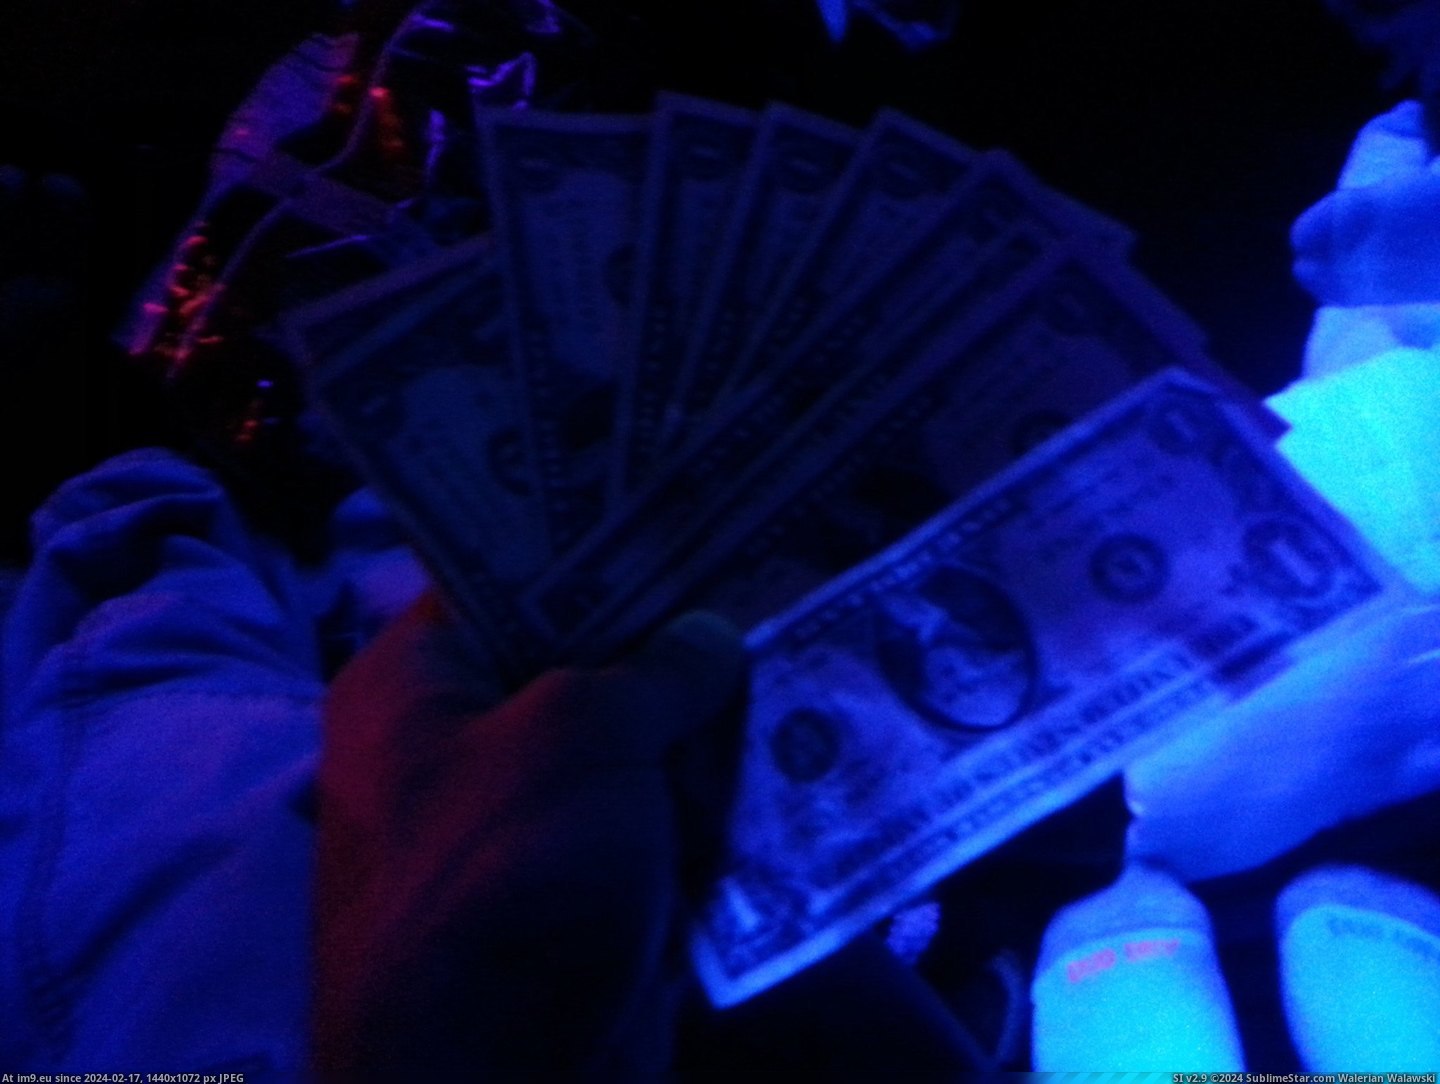 #One #Out #Party #Blacklight #Glowed #Pulled #Handful #Bills [Mildlyinteresting] I pulled out a handful of $1 bills at a blacklight party, and only one glowed. Pic. (Bild von album My r/MILDLYINTERESTING favs))